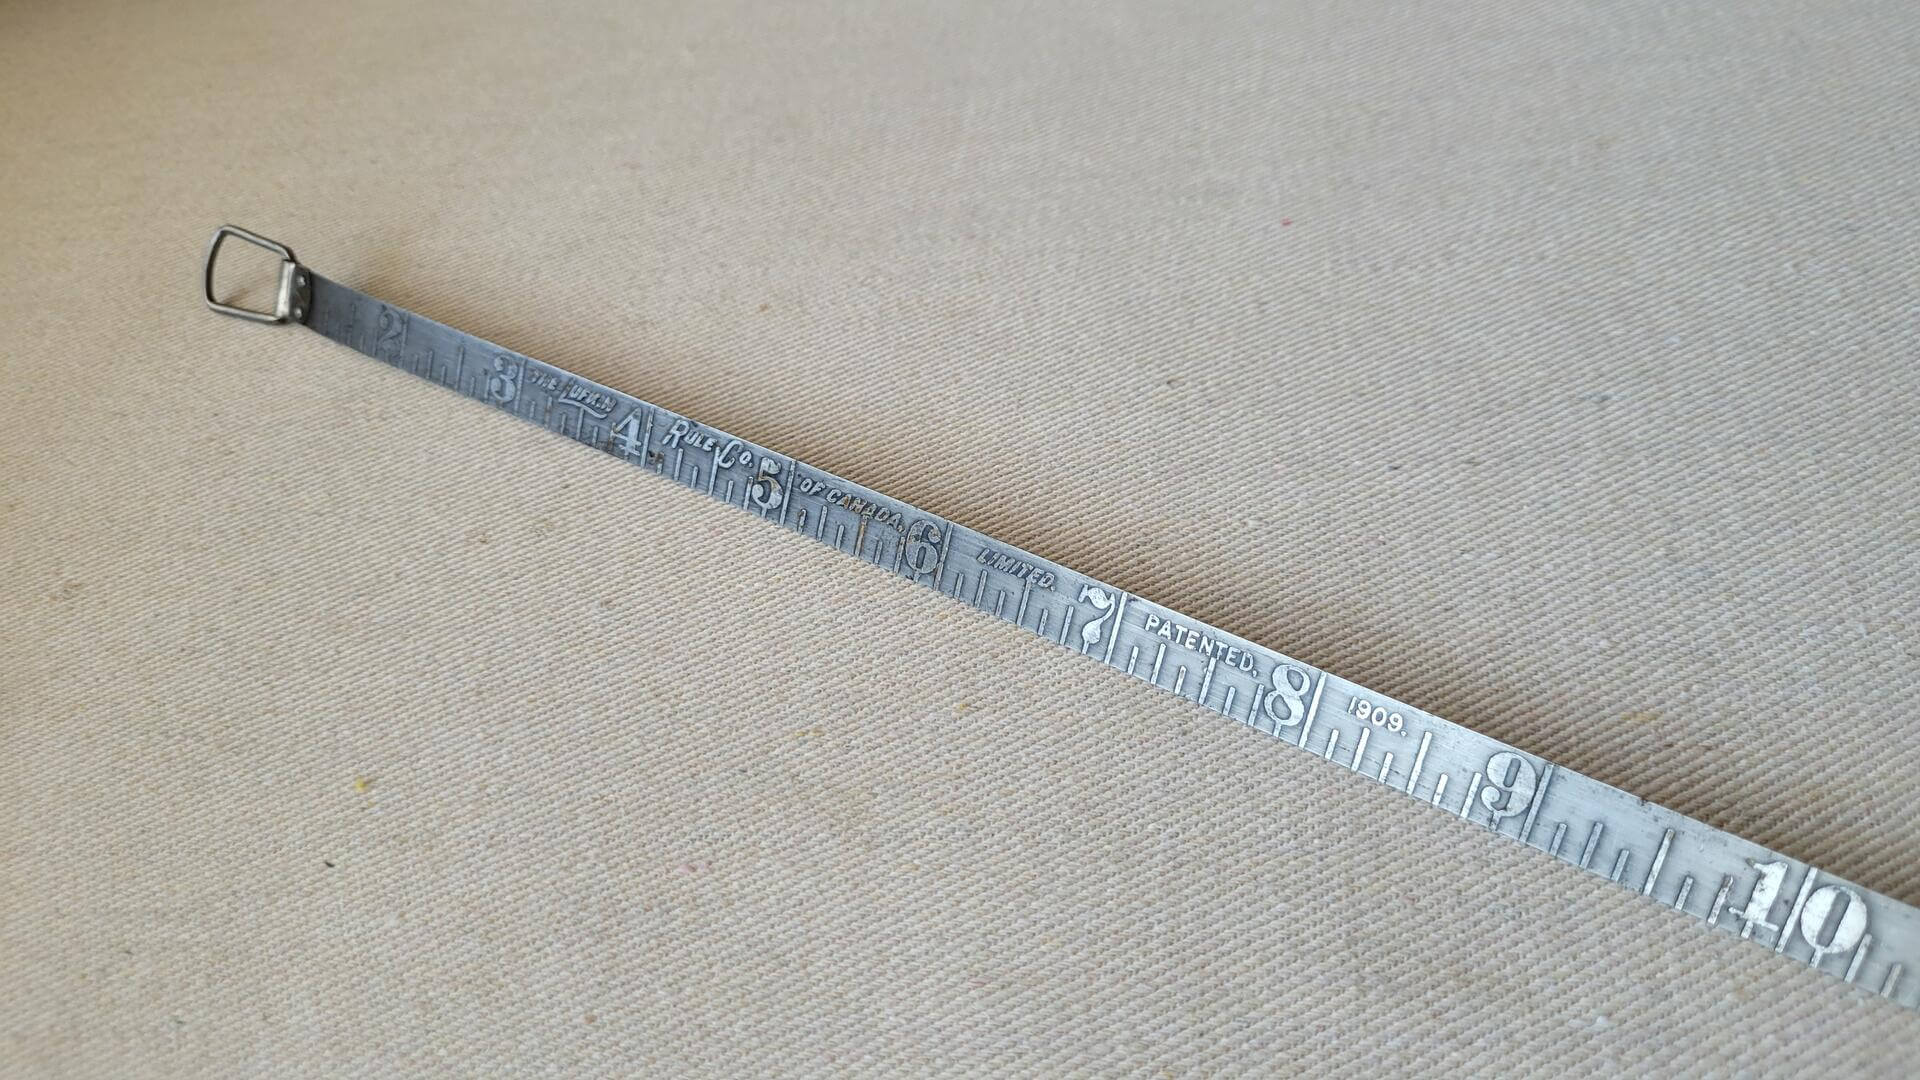 Rare vintage Lufking Rule Co of Canada No. 560 steel tape measure 25 ft pat 1909. Antique made in Canada collectible marking & measuring hand tool